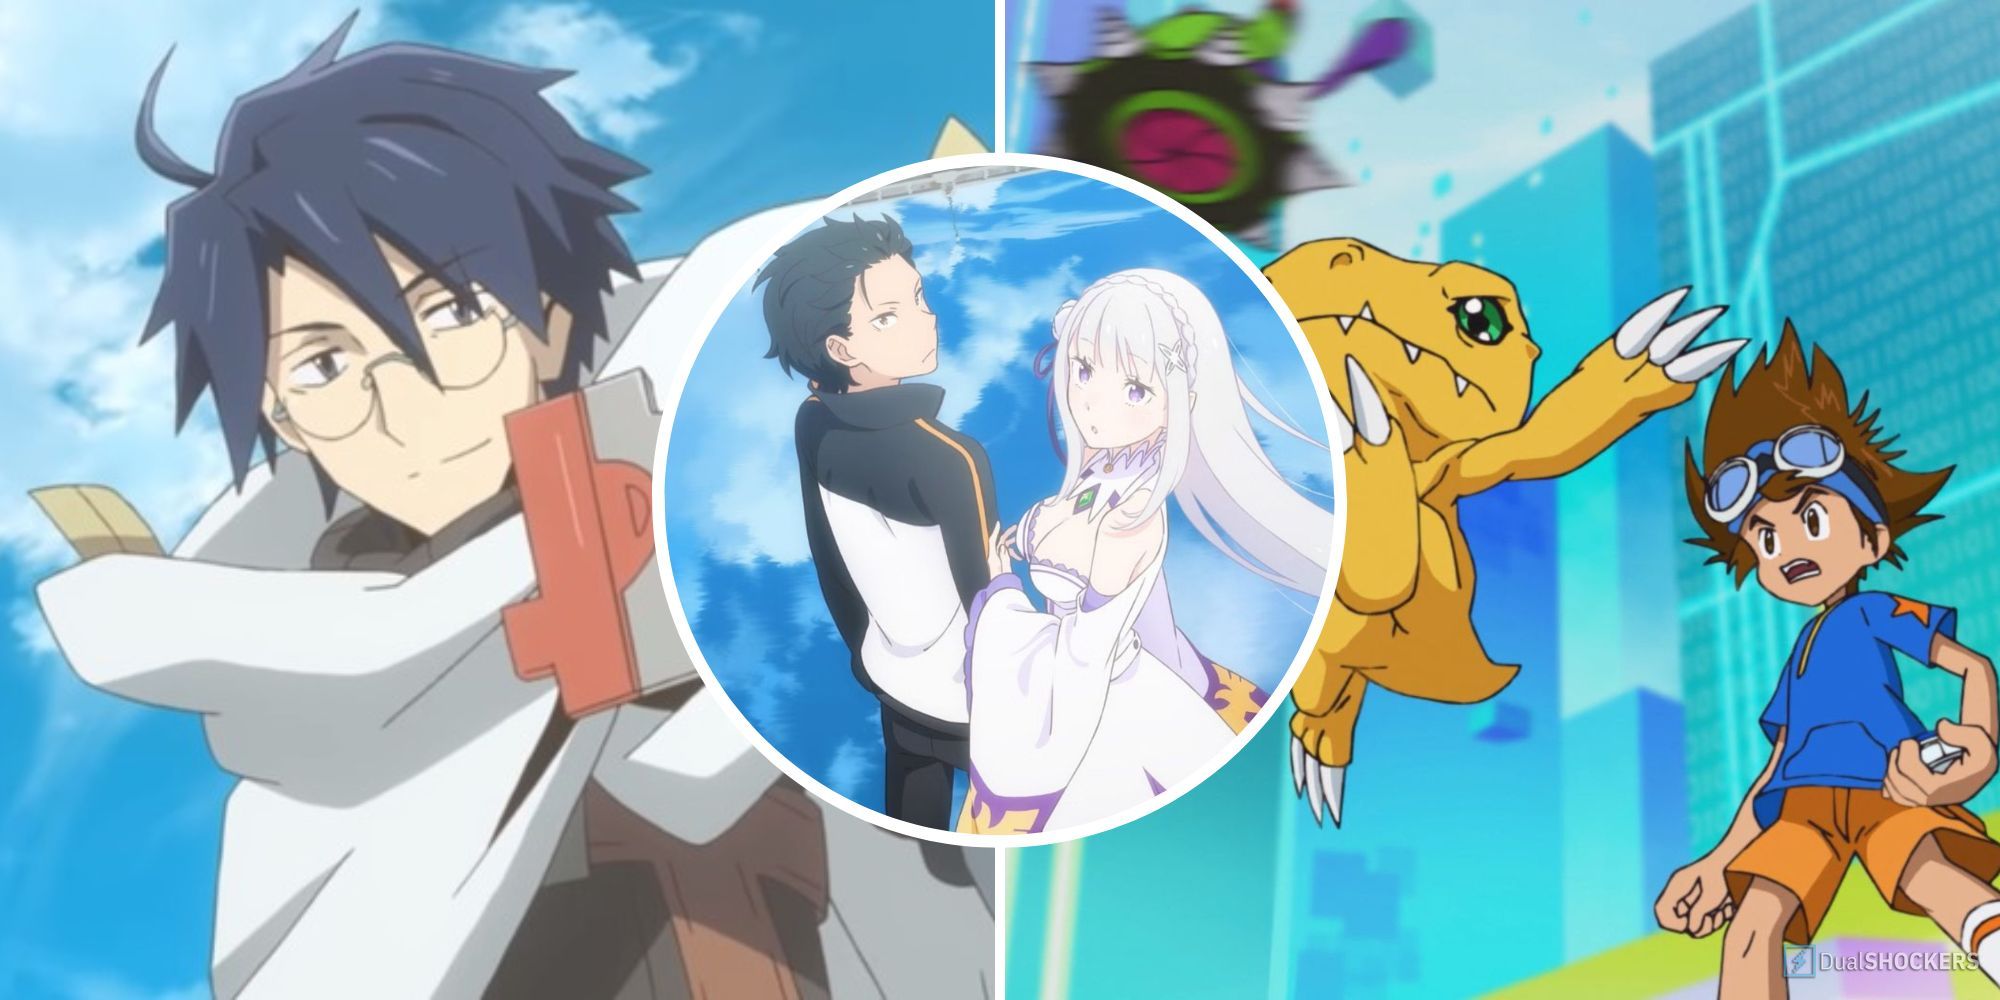 Another World: Top 30 Best Isekai Anime [Most Favorite Series] – Desuzone